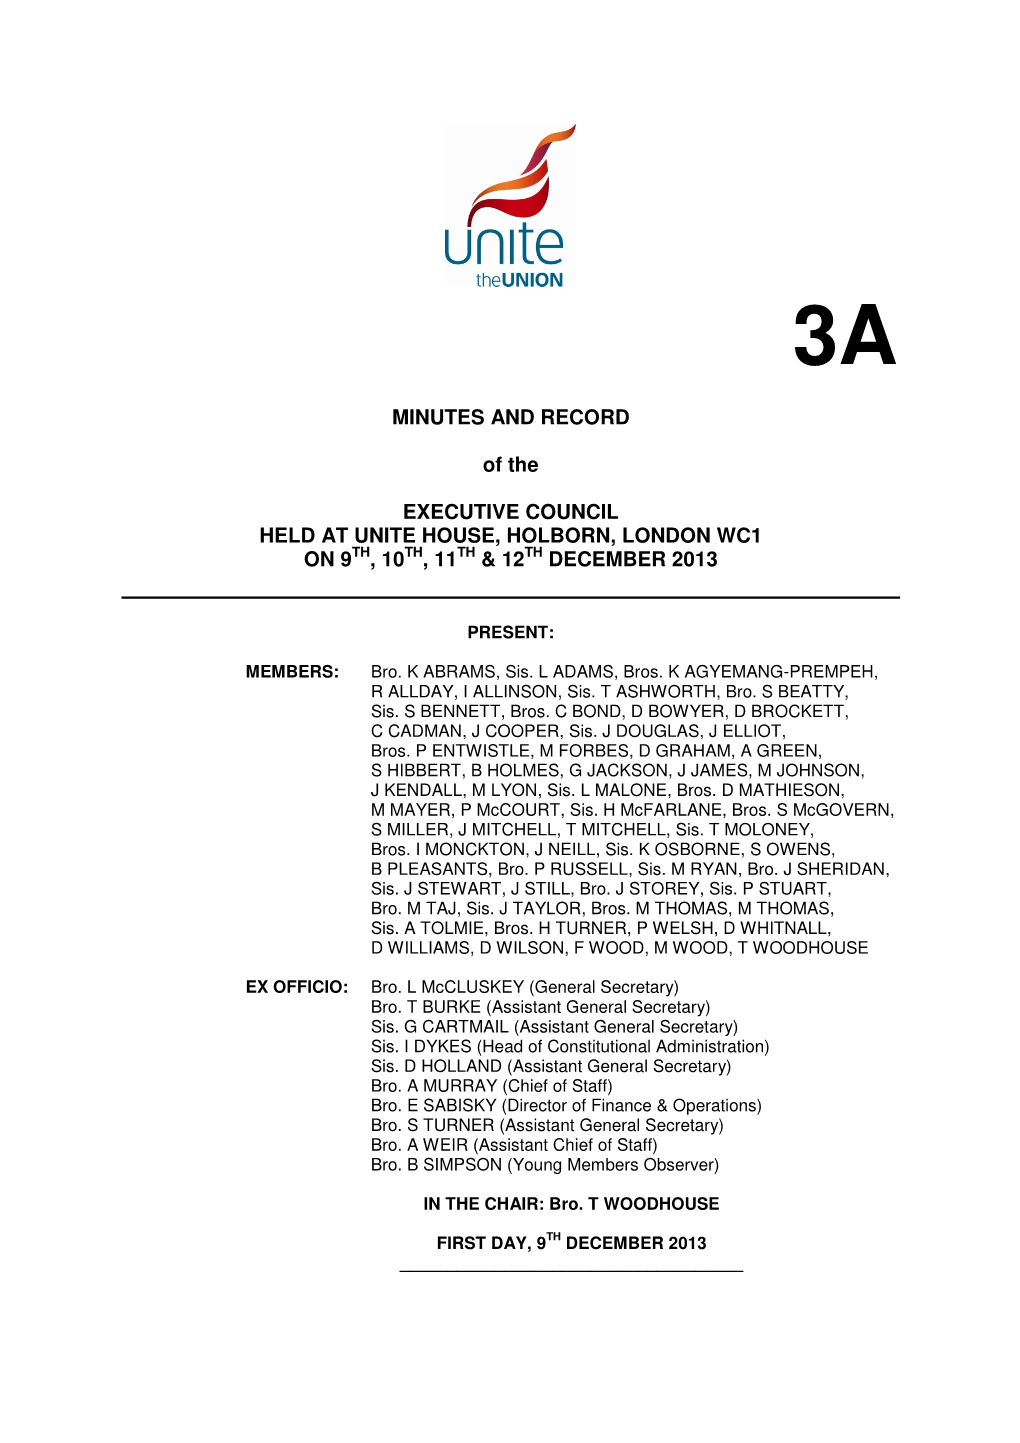 MINUTES and RECORD of the EXECUTIVE COUNCIL HELD at UNITE HOUSE, HOLBORN, LONDON WC1 on 9TH, 10TH, 11TH & 12TH DECEMBER 20